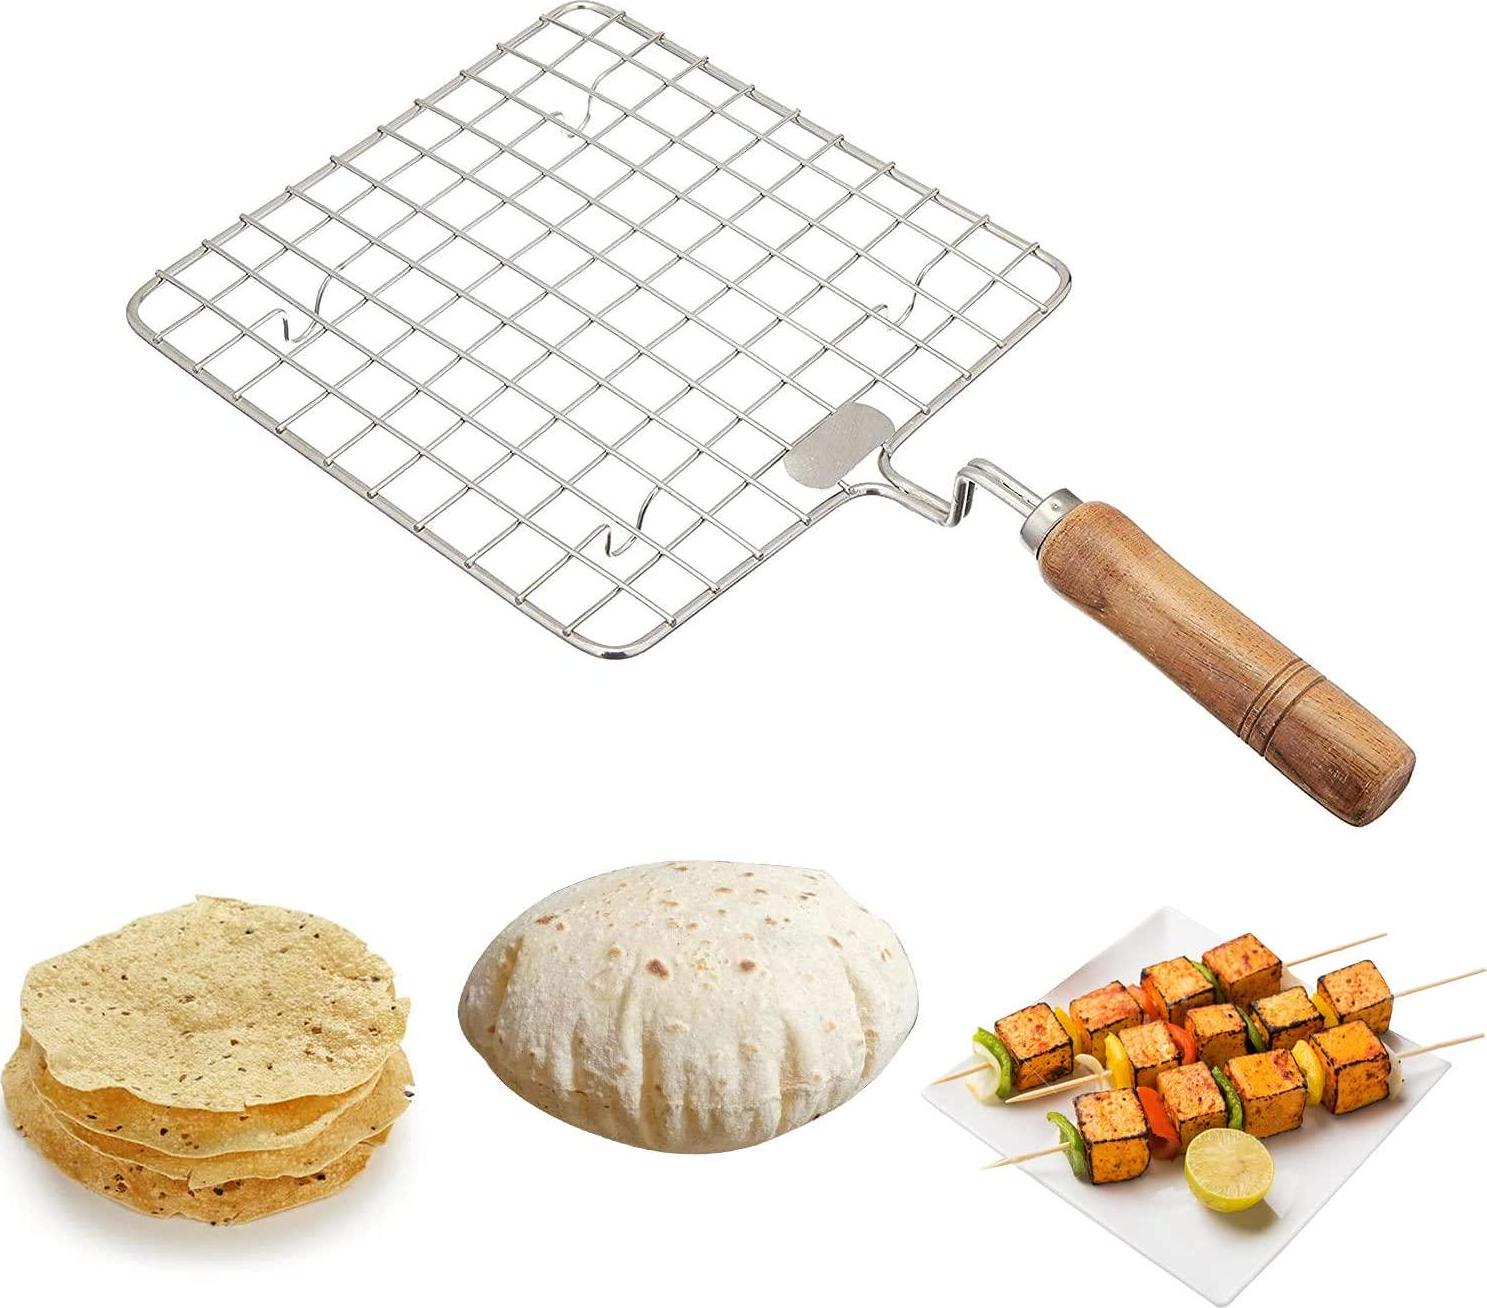 KSJONE, KSJONE Stainless Steel Multi-Functional Wire Steaming Cooling and Baking Barbecue Rack Square Wire Roaster Rack/Papad Jali/Roti Grill Square Shape with Wooden Handle